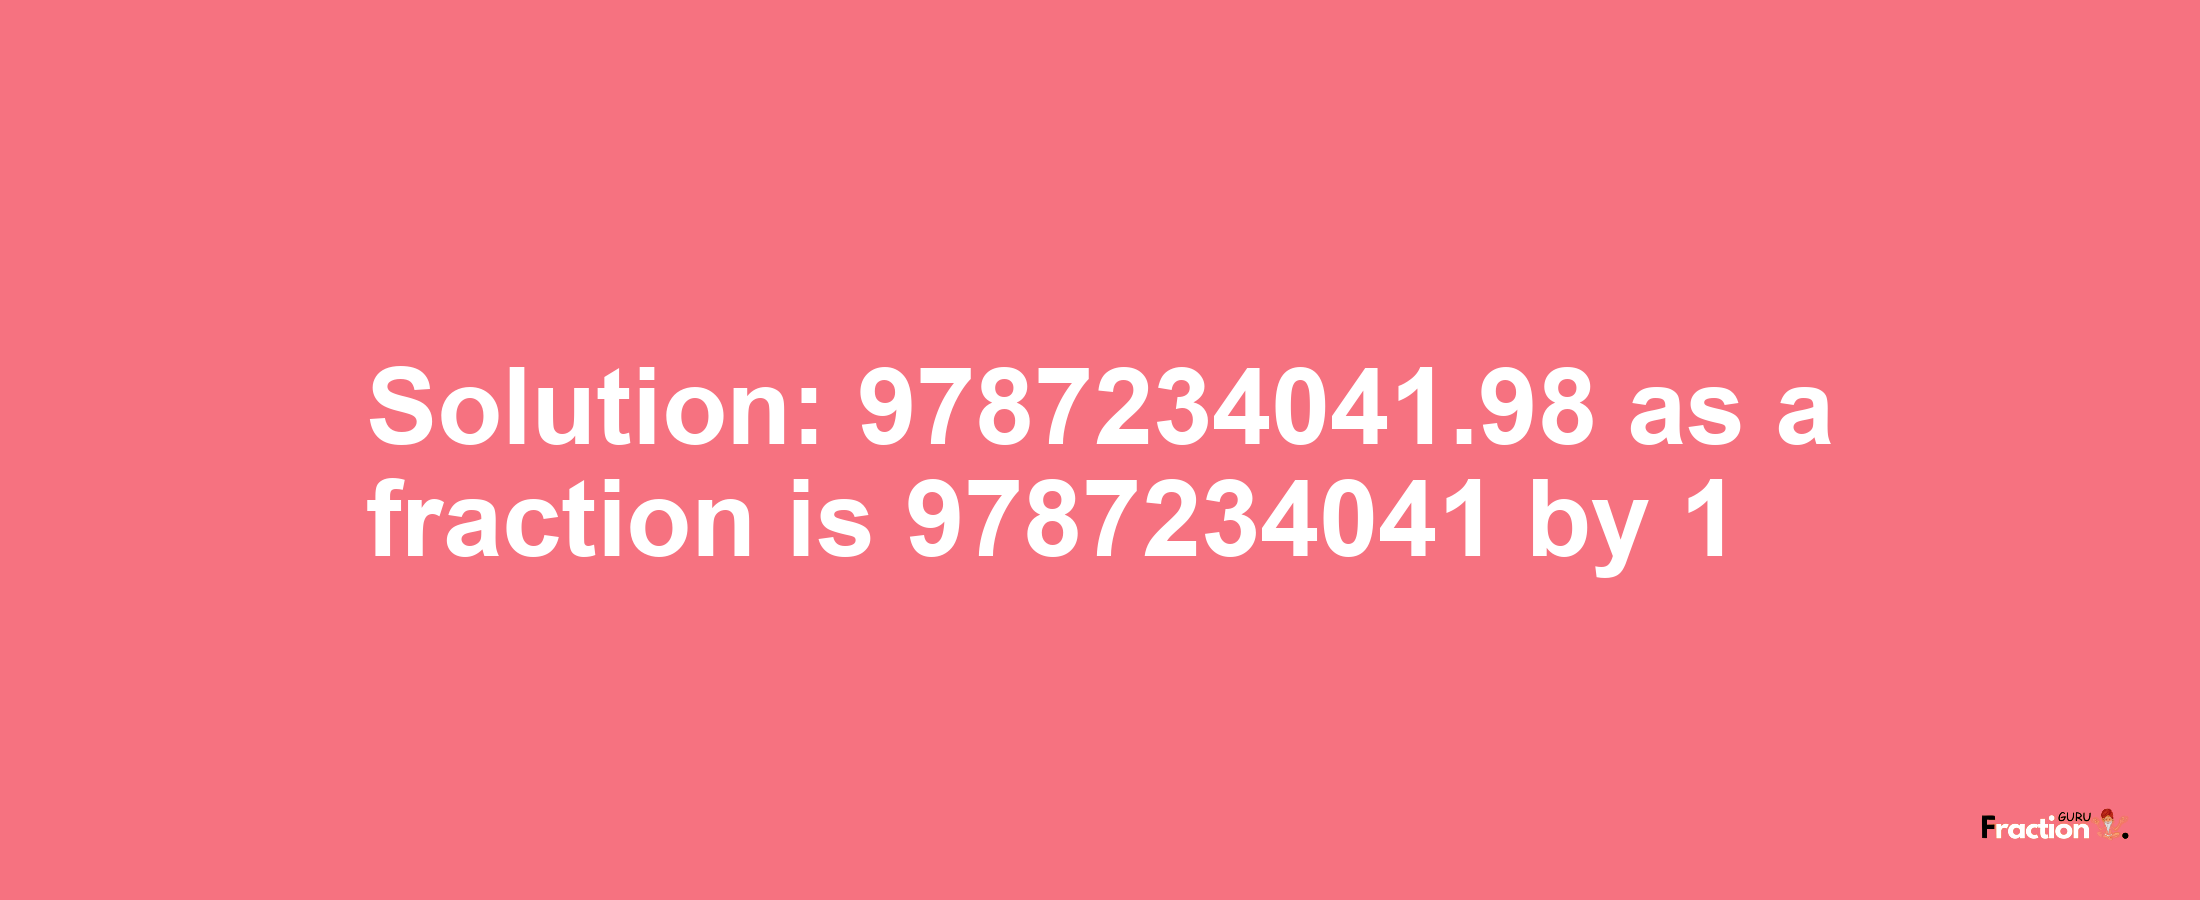 Solution:9787234041.98 as a fraction is 9787234041/1